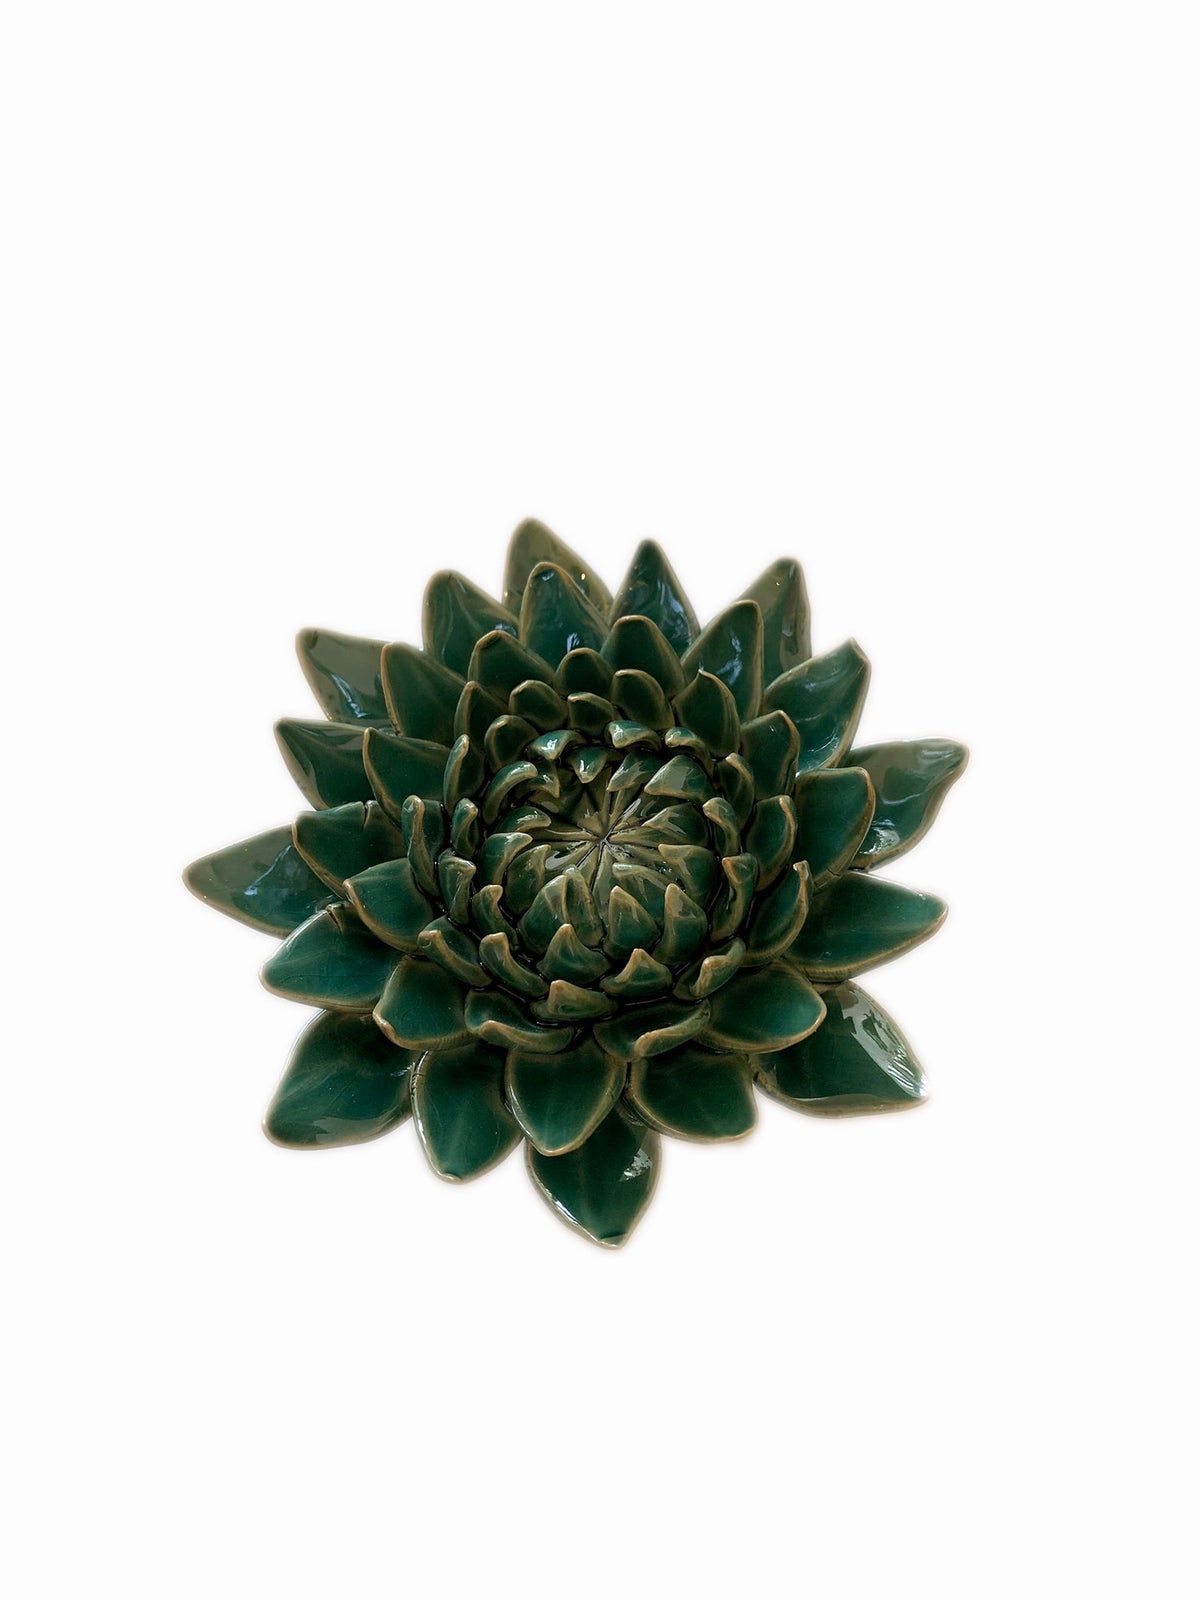 Domain by Laura Hodges Studio Large Teal Ceramic Flower